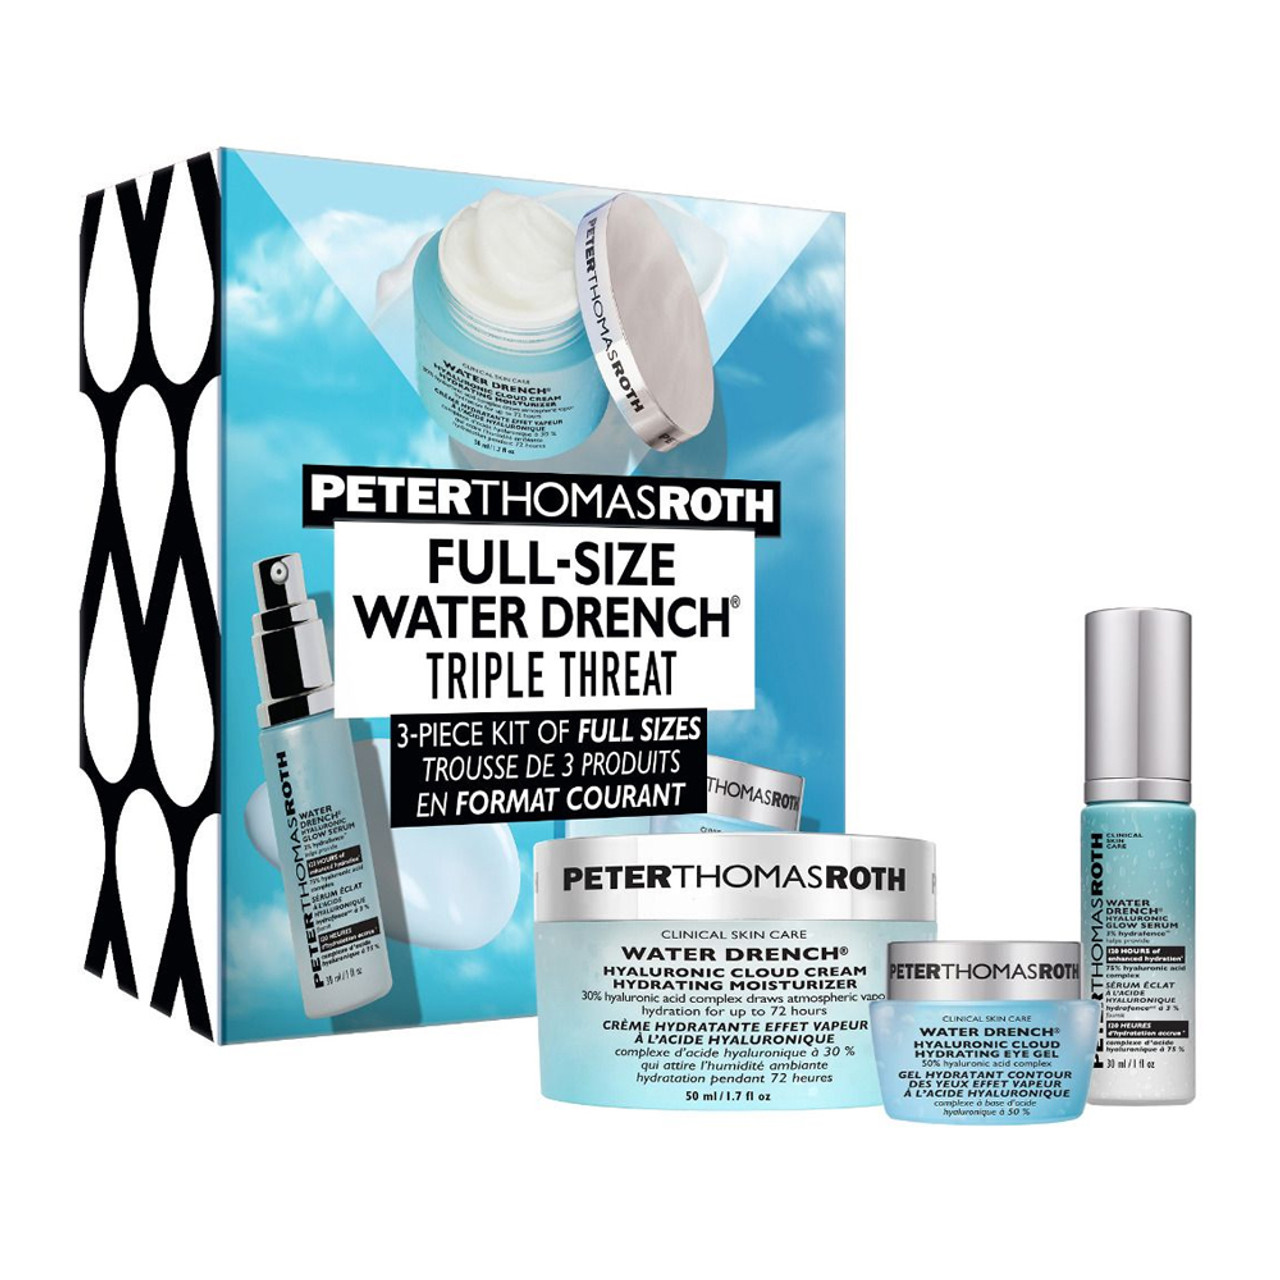 Peter Thomas Roth Water Drench Triple Threat 3-Piece Kit ($169 Value)